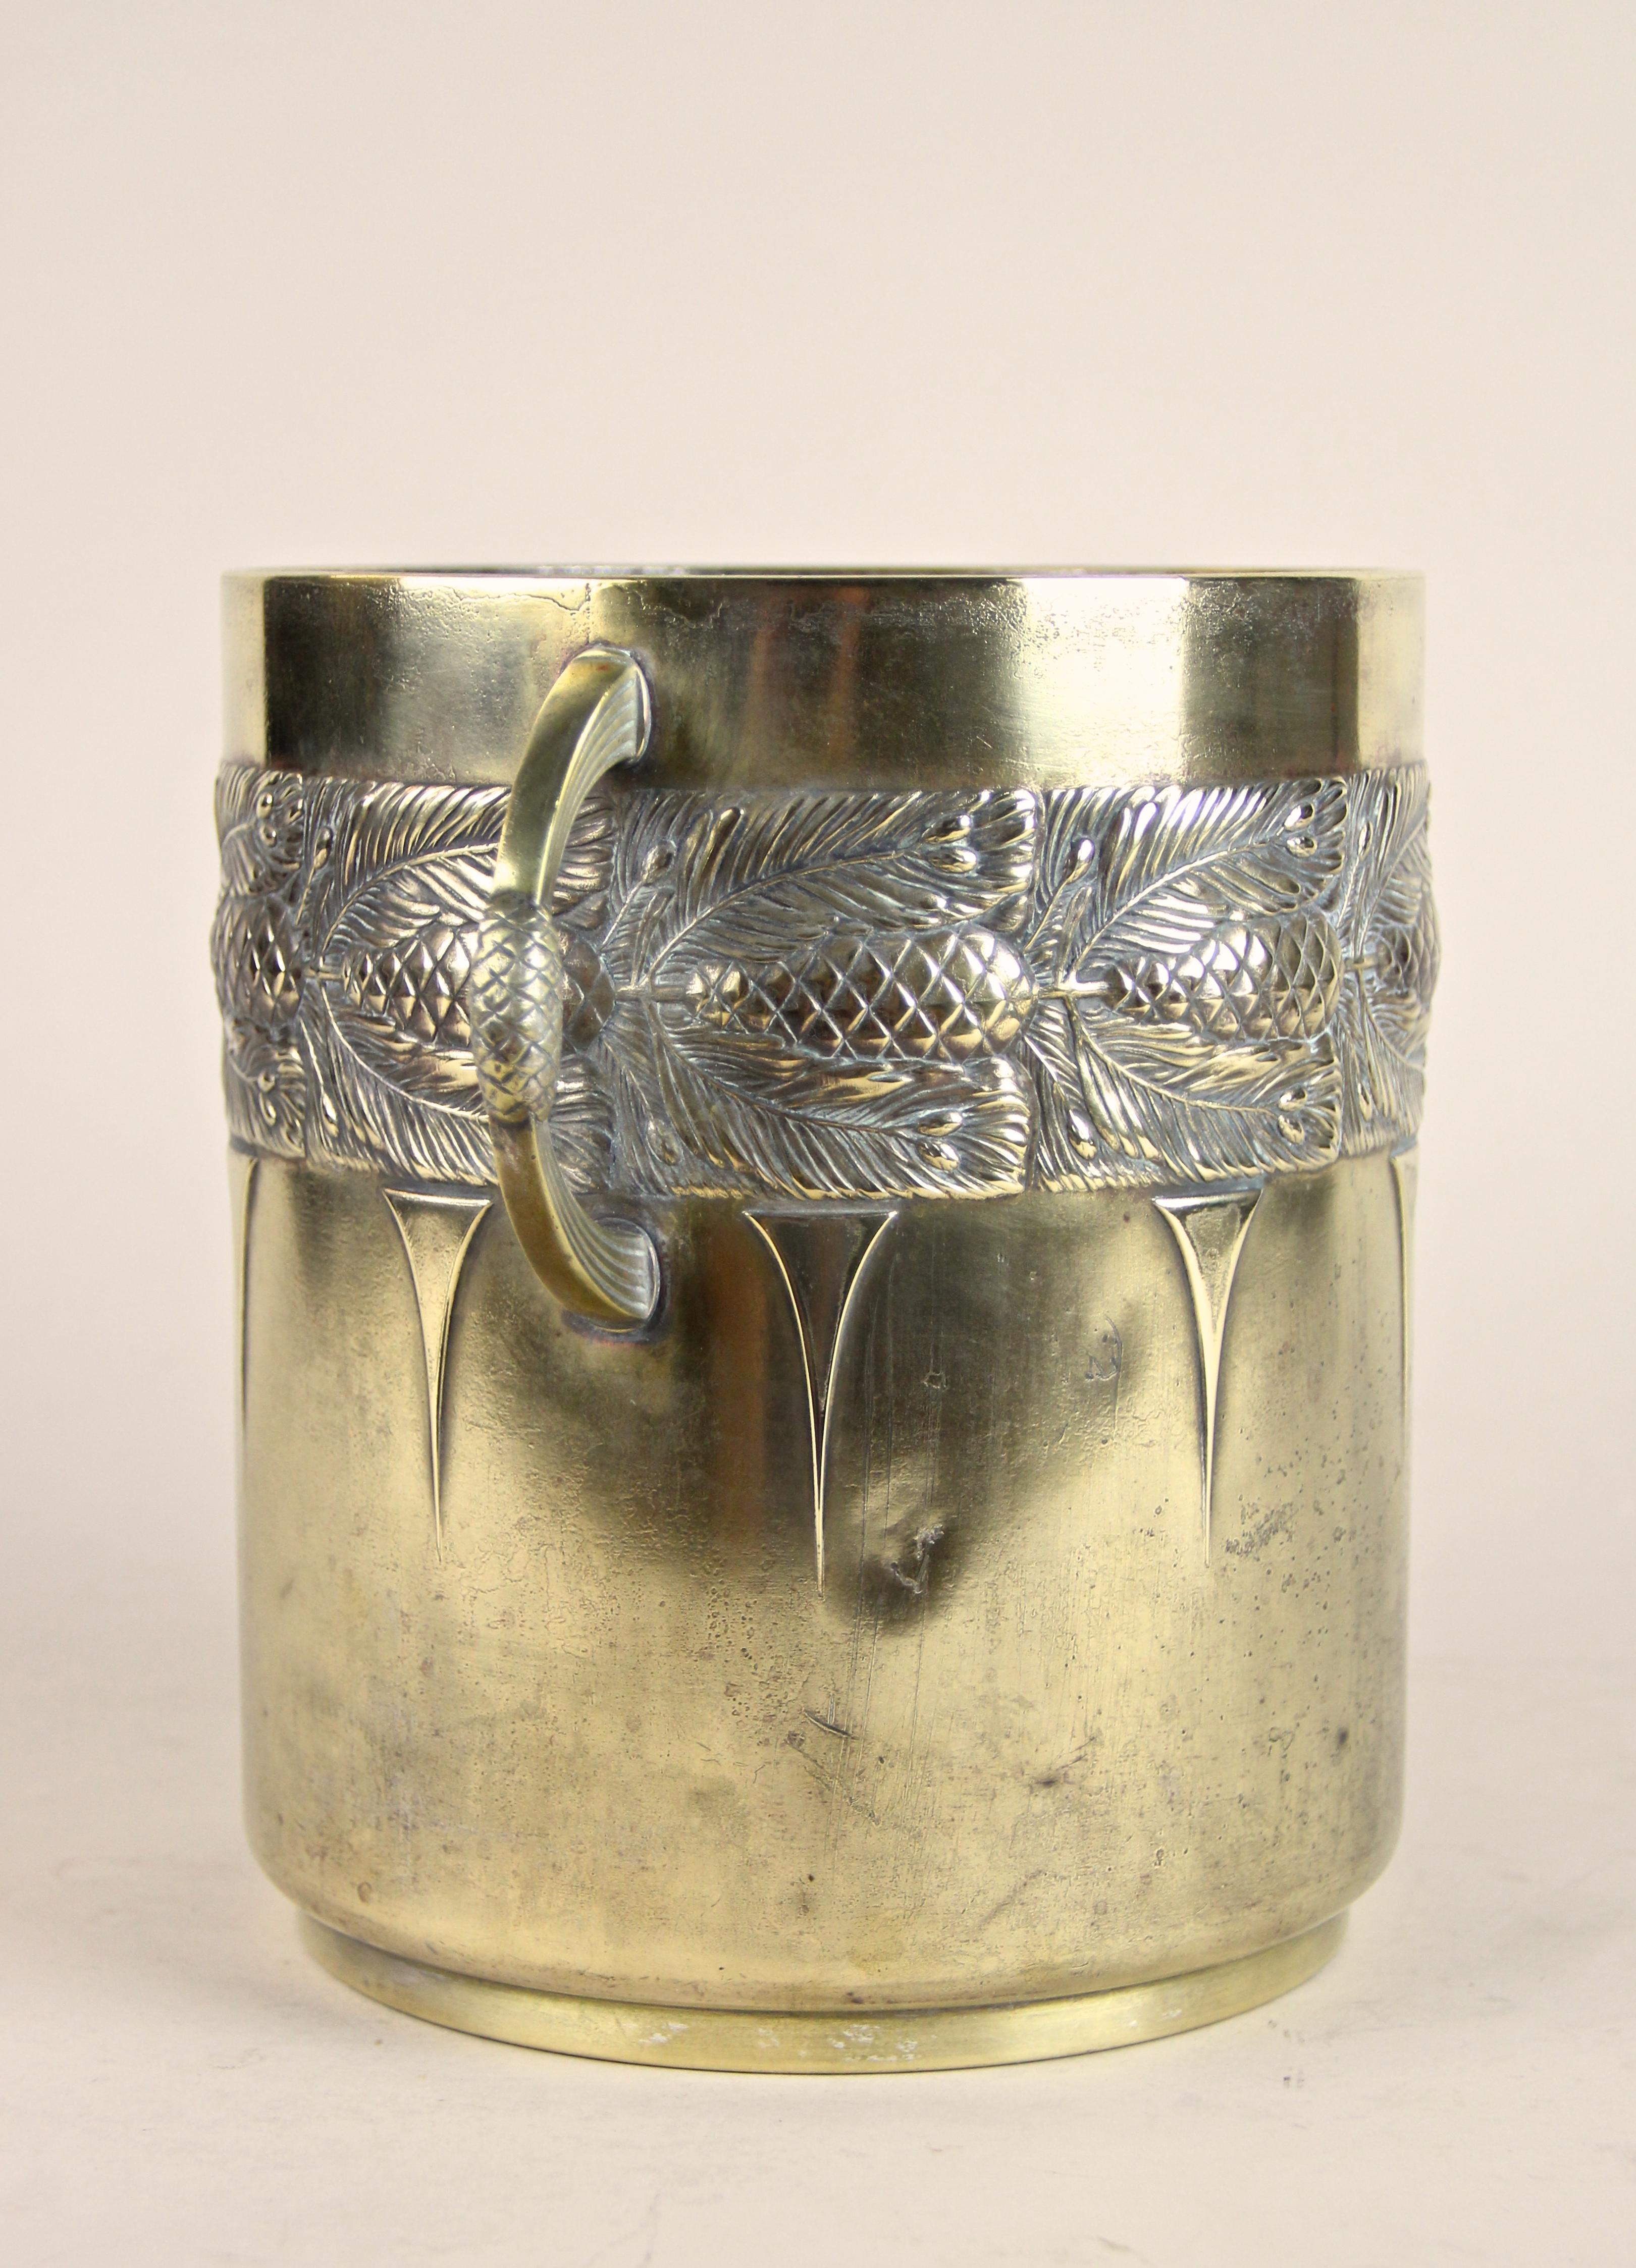 Embossed Brass Wine Cooler or Cachepot by WMF Art Nouveau, Germany, circa 1915